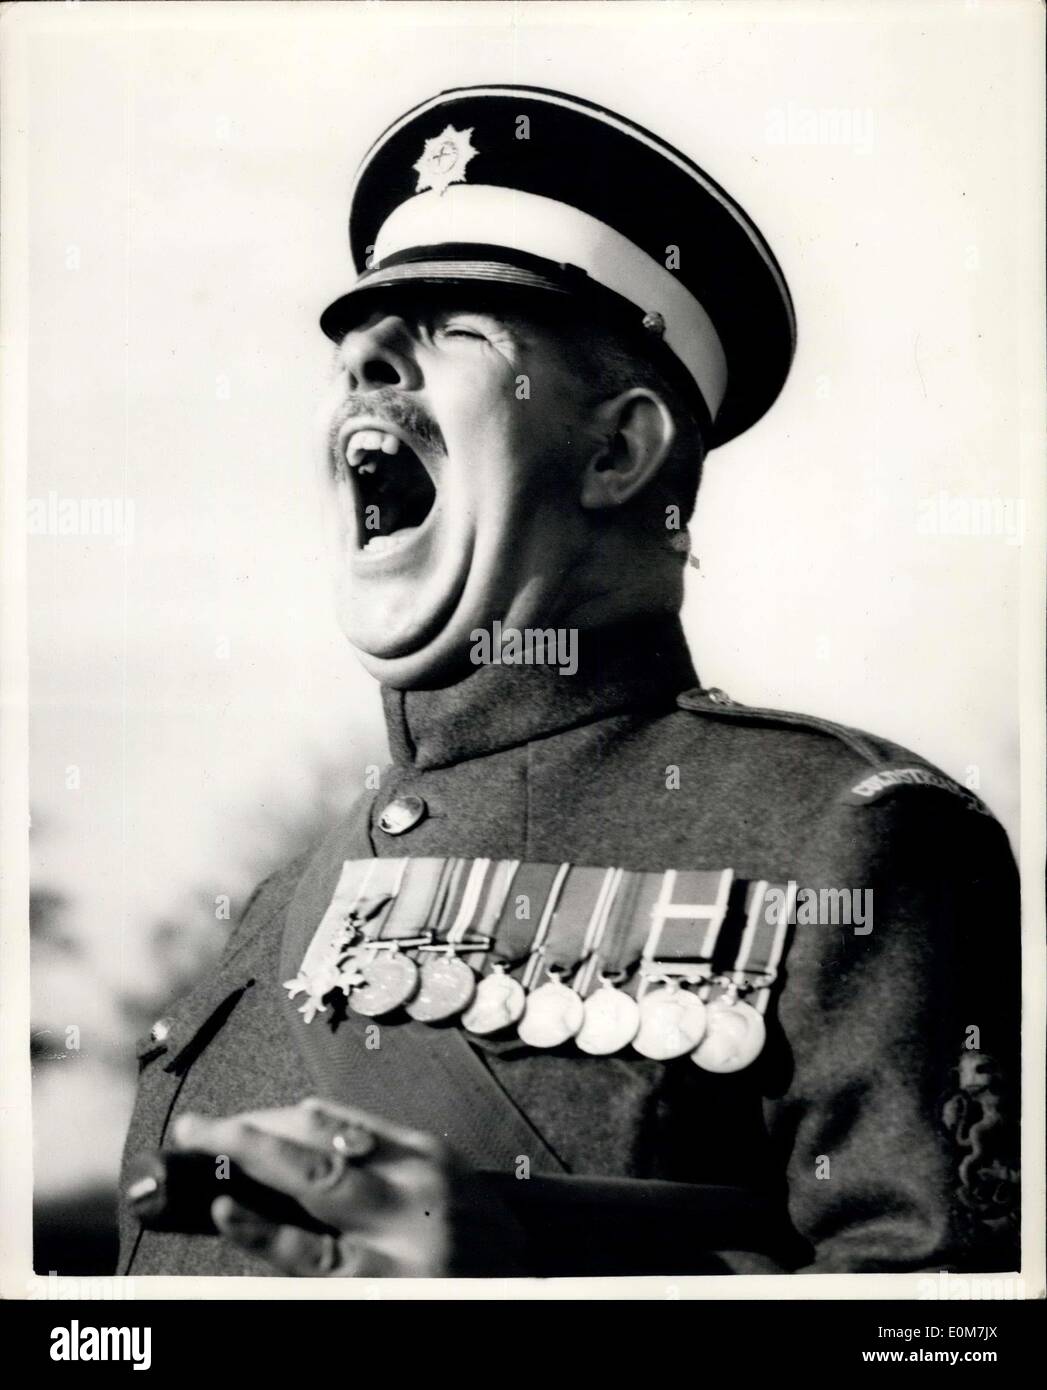 Nov. 19, 1953 - BSM Britain Receives Award.: Regimental Sergeant Major Ronald Brittain, Coldstream Guards, owner of ''the loudest voice in the British Army'', today received a bar to his Long Service and Good Conduct Medal. He has been in the Army 36 years. The presentation was made by Major General E.S.B. Gaffney, GOC Aldershot District, at a passing out parade at Mons Officer Cadet School, at a passing out parade at Mons Officer Cadet School, Aldershot. Photo shows RSM Ronald Brittain, wearing the bar - seen in typical mood at Aldershot today. Stock Photo